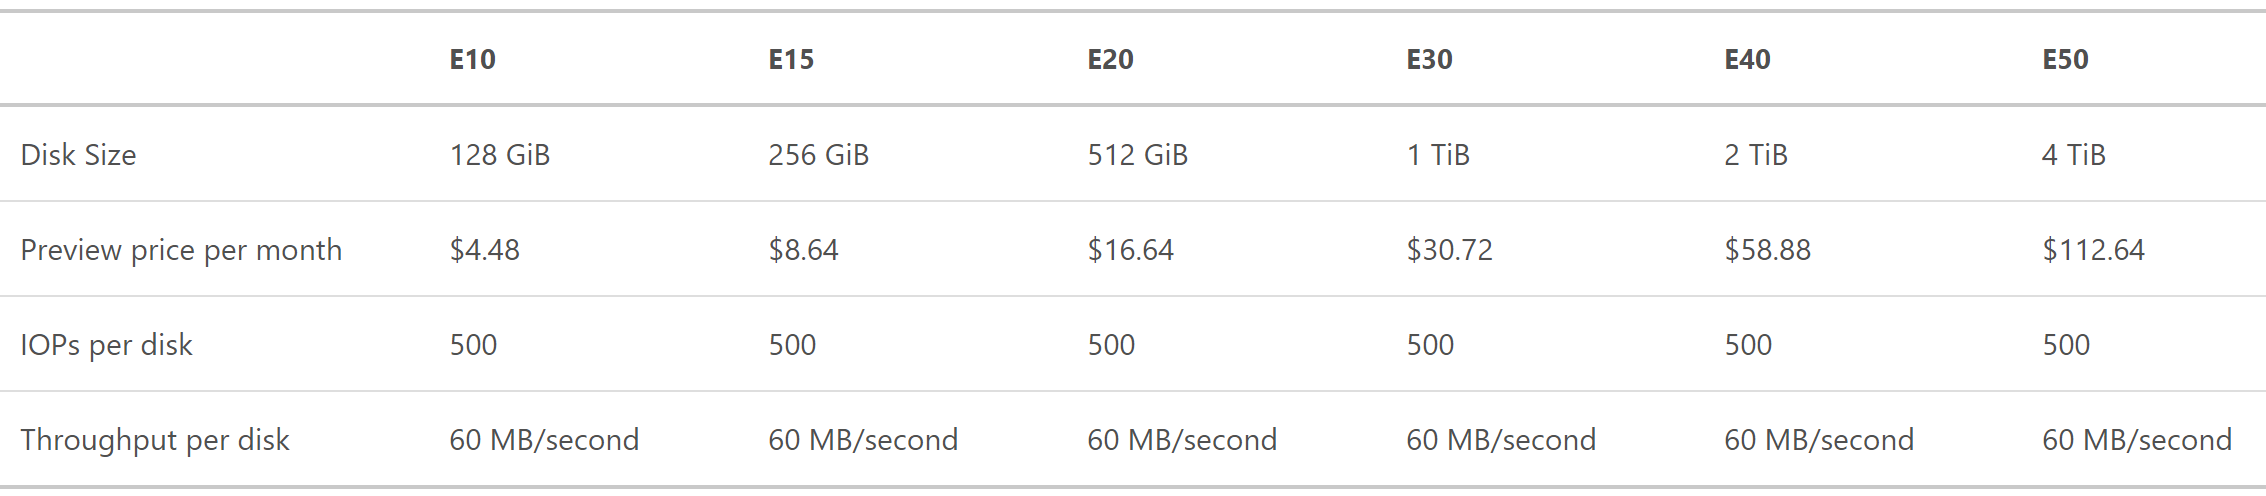 Standard SSD Pricing in East US [Image Credit: Microsoft]